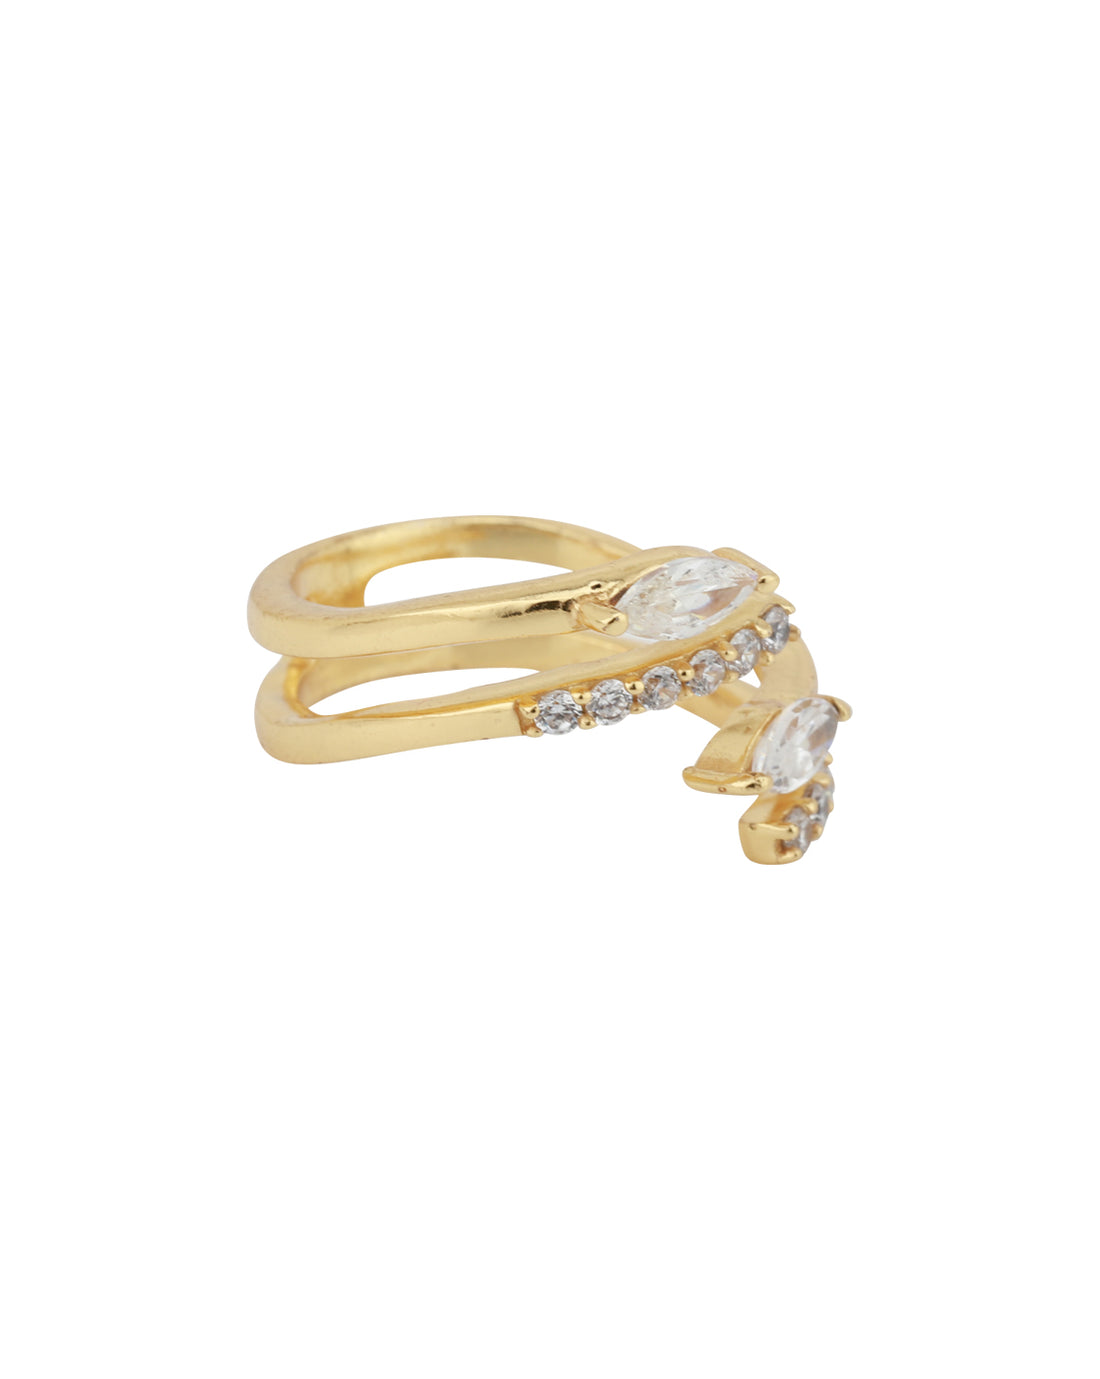 Carlton London Gold Plated Cz Studded Adjustable Contemporary Finger Ring For Women